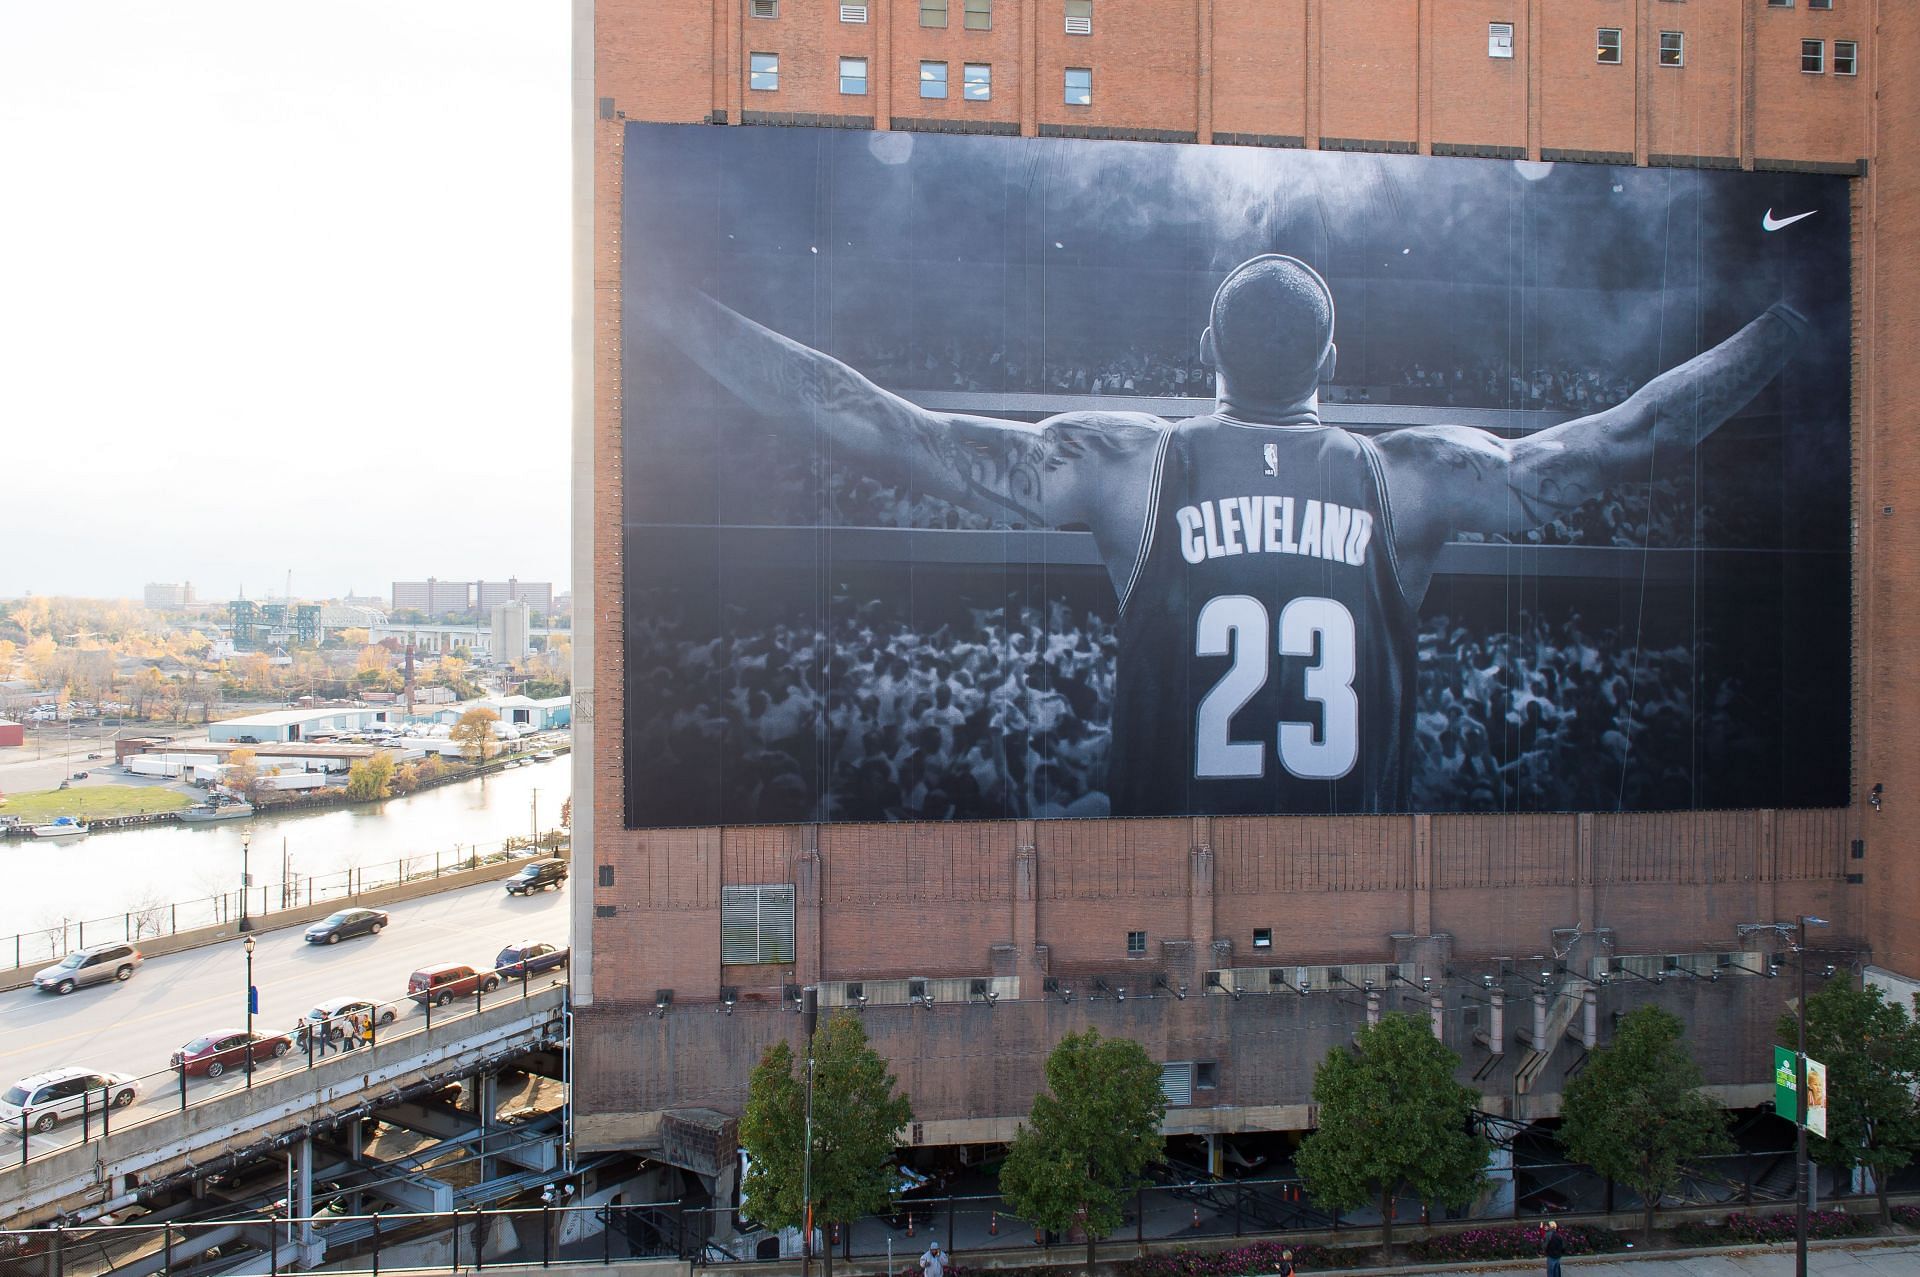 A Nike advertisement of Lebron James of the Cleveland Cavaliers is seen on the Landmark Office Towers building on October 30, 2014 in Cleveland, Ohio.